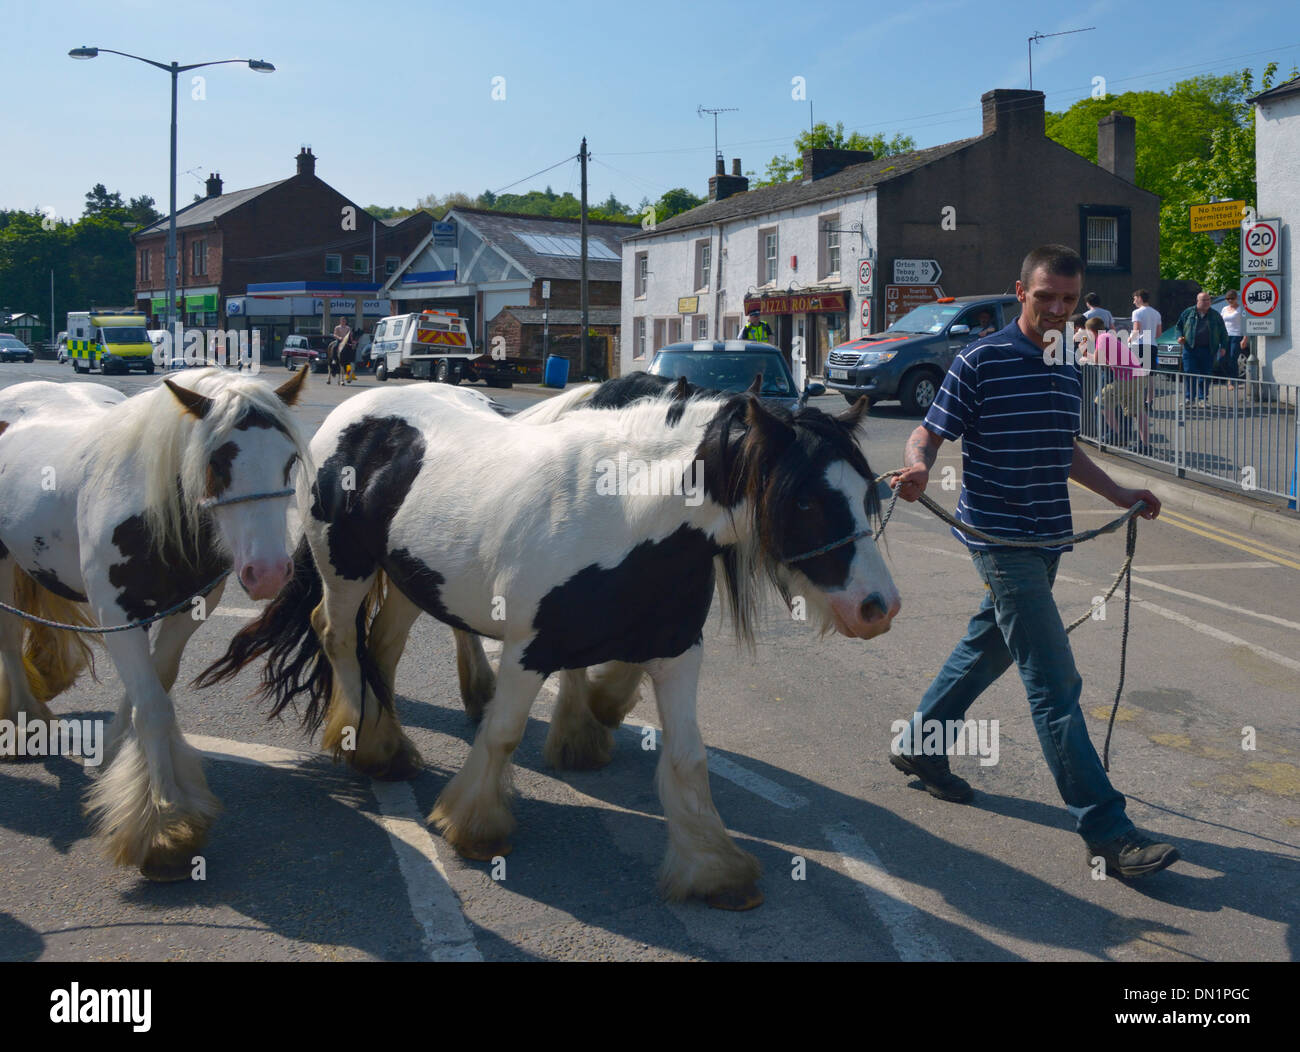 Gypsy traveller with horses. Appleby Horse Fair, June 2013. Appleby-in-Westmorland, Cumbria, England, United Kingdom, Europe. Stock Photo